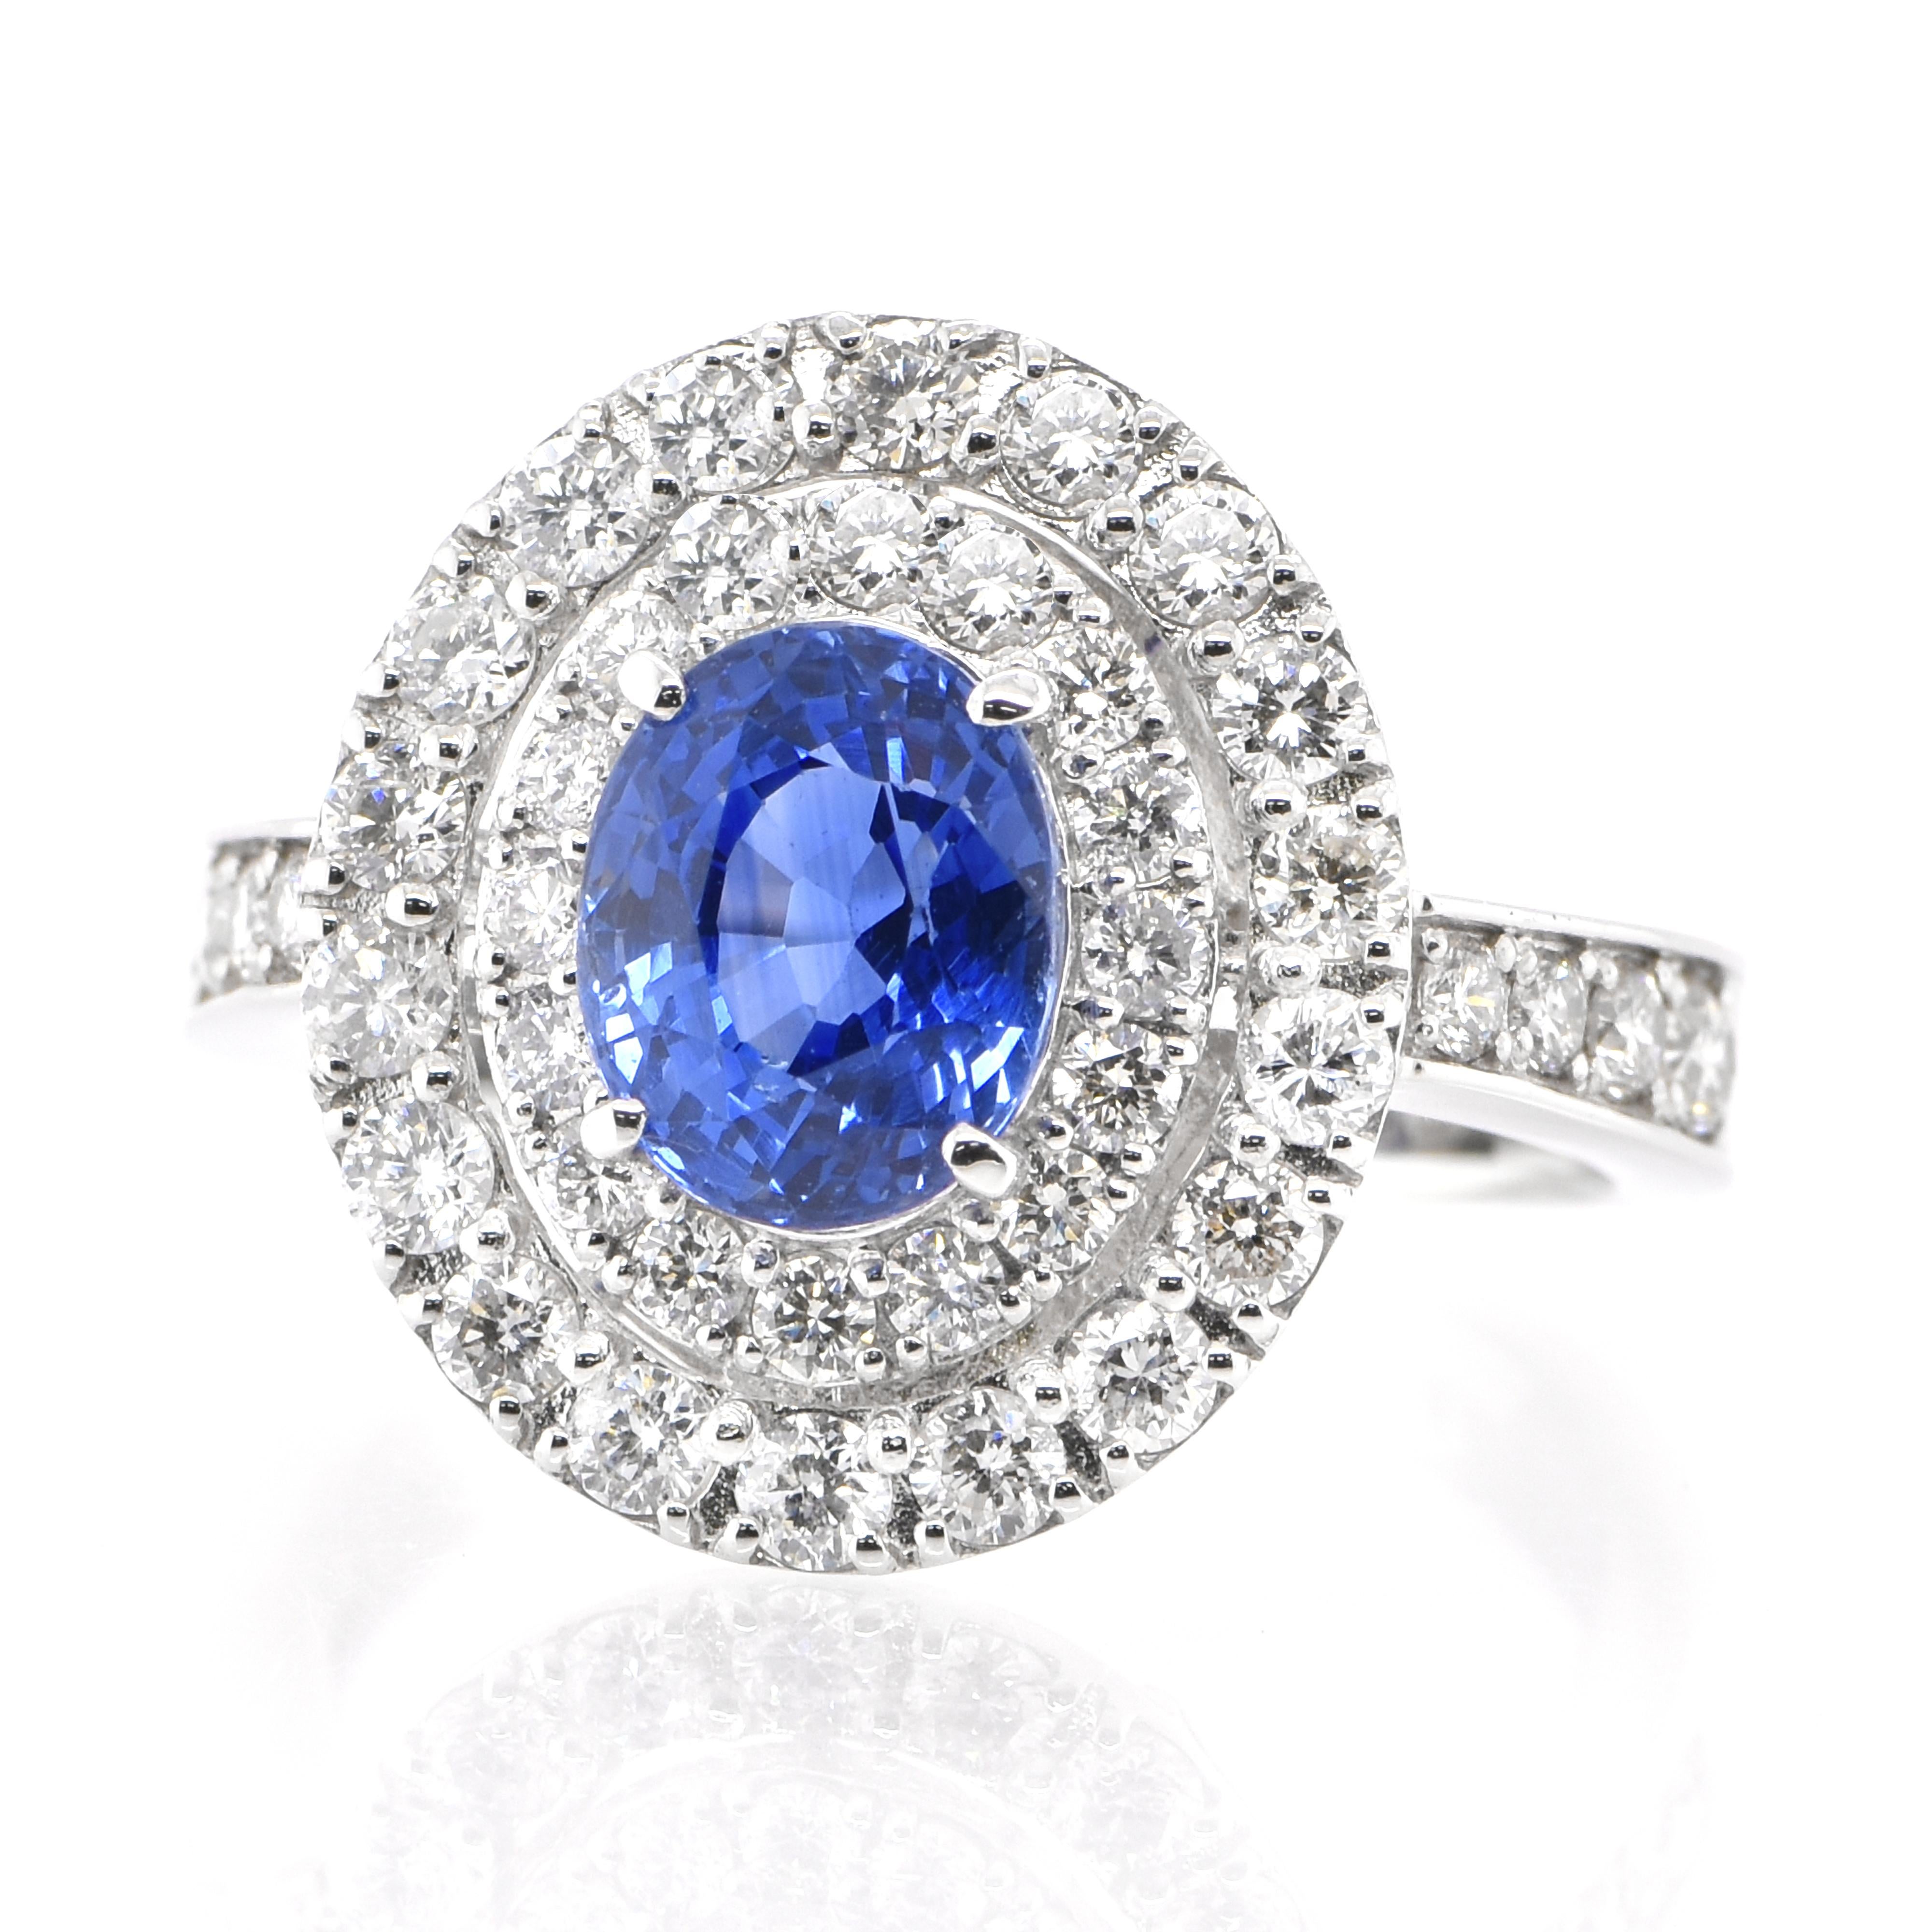 A beautiful ring featuring 2.39 Carat, Natural Sapphire and 1.01 carats Diamond Accents set in Platinum. Sapphires have extraordinary durability - they excel in hardness as well as toughness and durability making them very popular in jewelry.